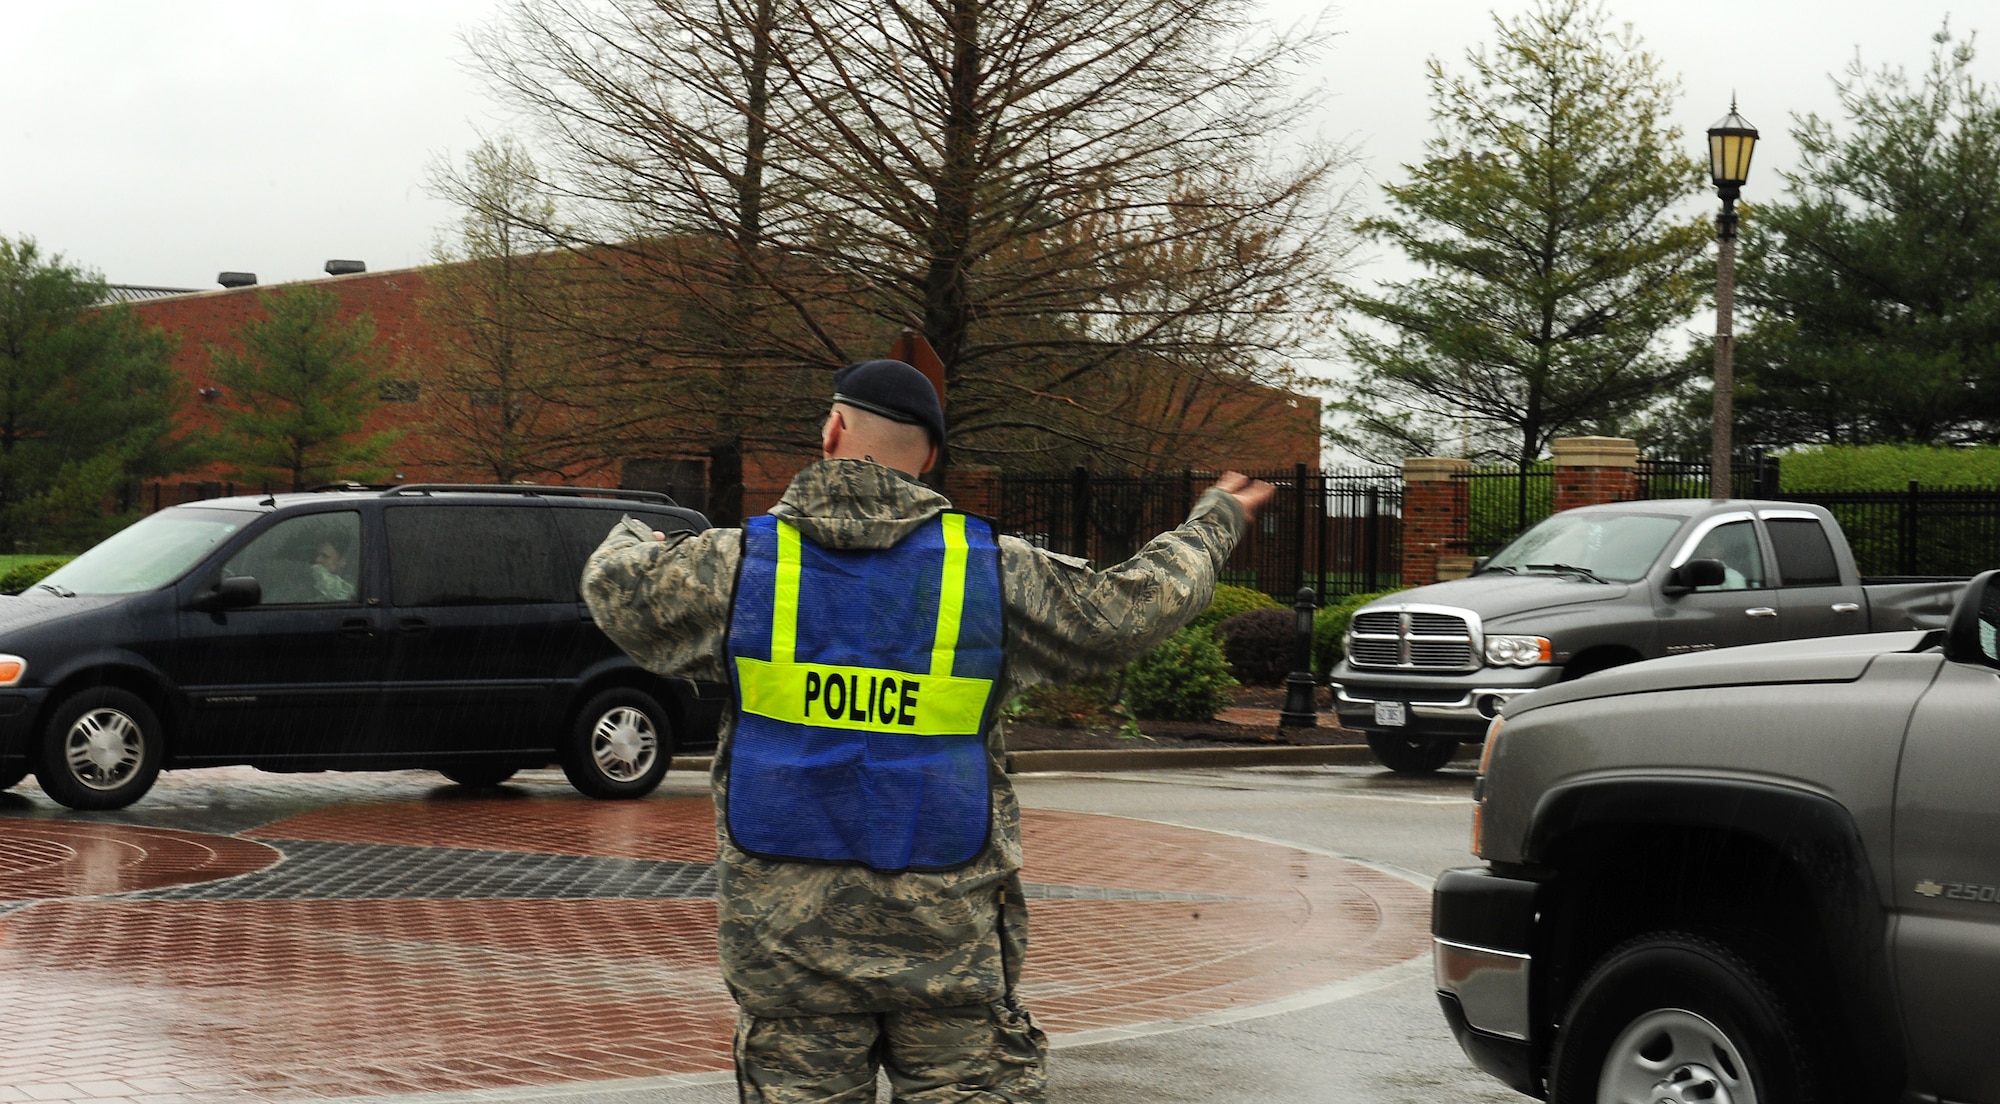 A 375th Security Forces Squadron patrolman directs traffic on Hangar Road after flooding closed several streets on Scott Air Force Base, Ill., April. 18, 2013. Severe weather dumped 5.2 inches of rain in five hours.  Base roads got congested when unit leaders granted early release of workers, due to deteriorating driving conditions. Roads were clear by 4 p.m. (U.S. Air Force photo/Airman 1st Class Jaeda Waffer)